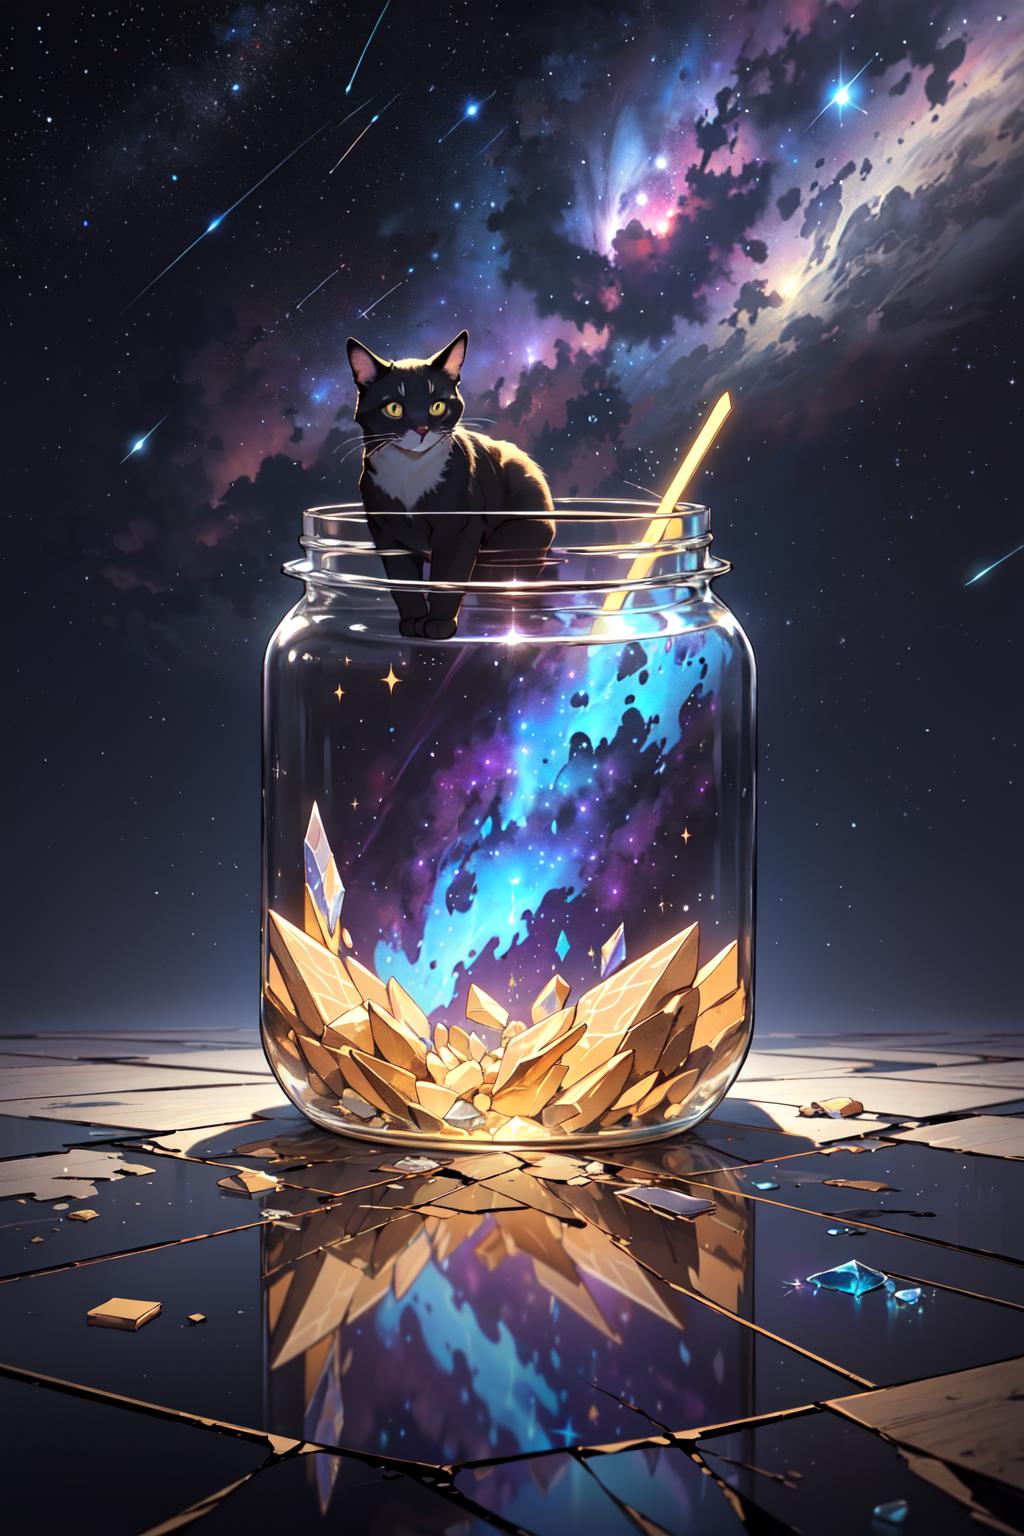 A black and white cat sitting in a jar filled with crystals.